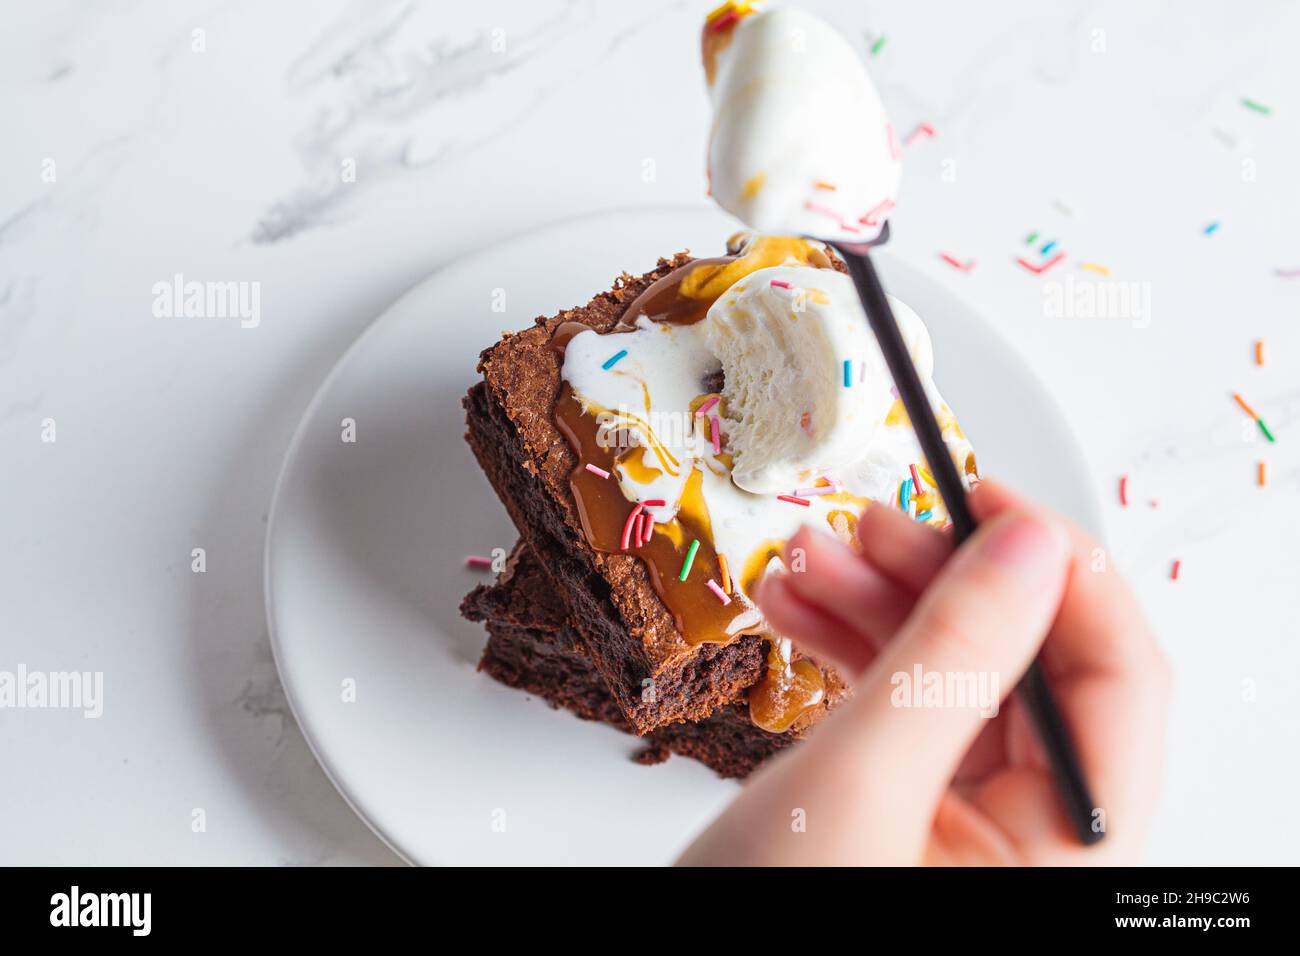 Children's hand eating brownie with a scoop of ice cream, caramel and sprinkles, white background. Stock Photo